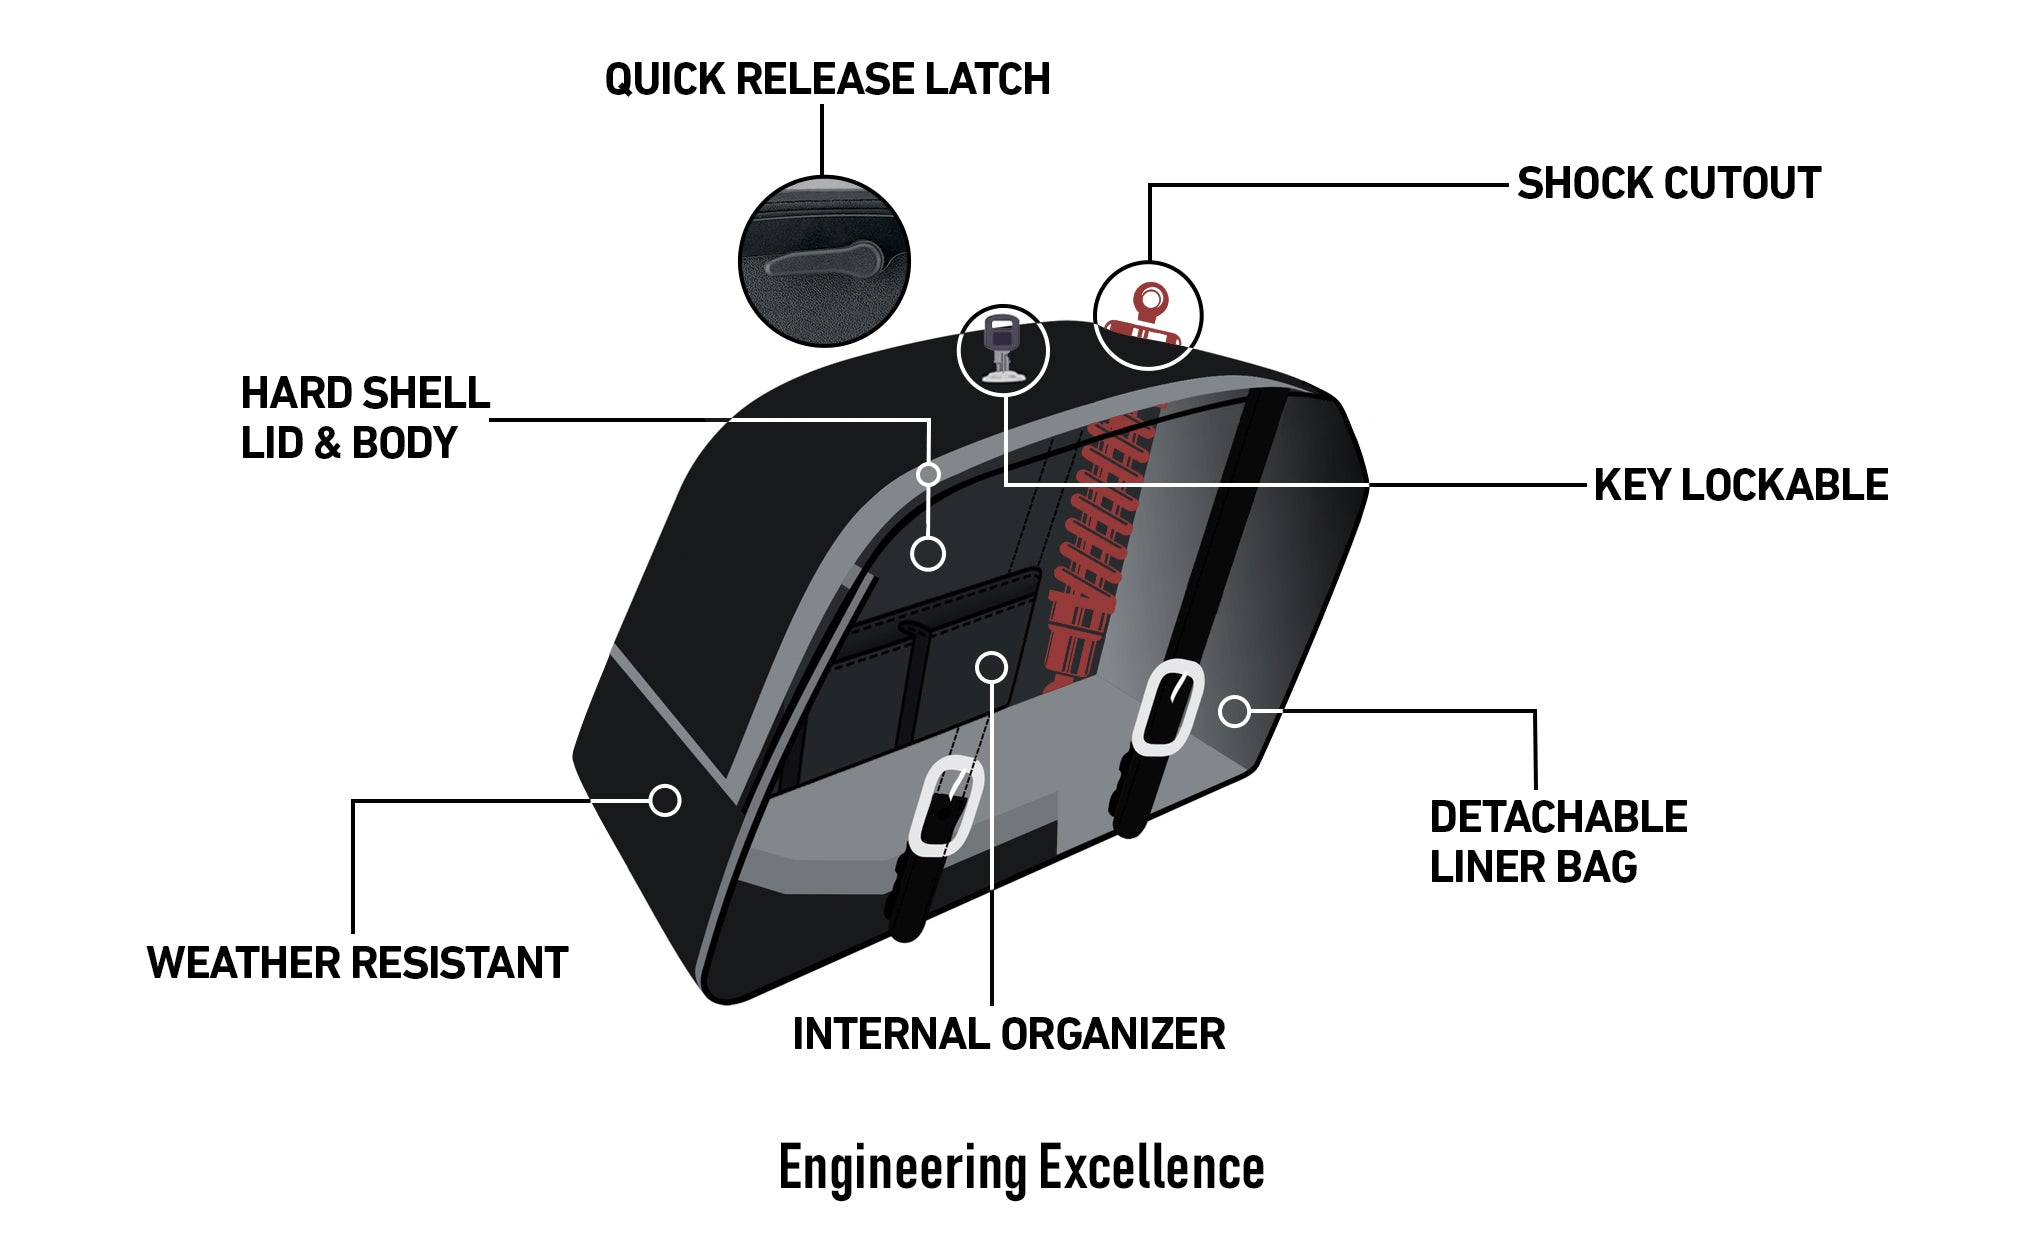 Viking Baldur Extra Large Shock Cut Out Painted Motorcycle Hard Saddlebags For Harley Dyna Fat Bob Fxdf Se Engineering Excellence with Bag on Bike @expand